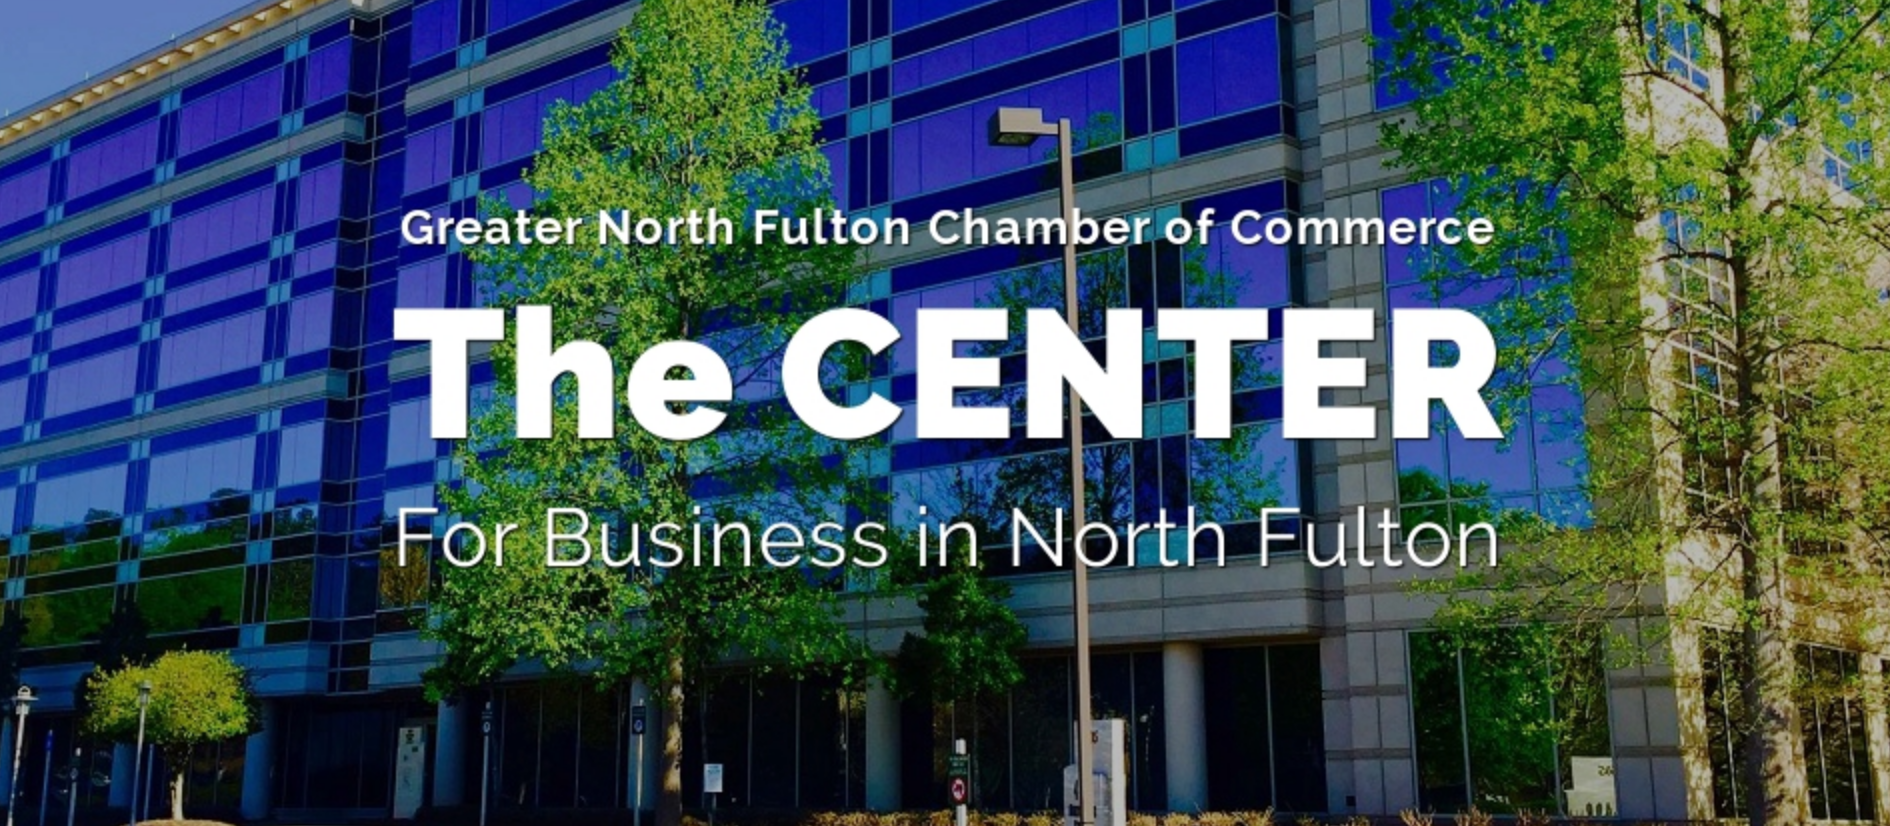 Post Your Events On The Greater North Fulton Chamber of Commerce Website Call 770-993-8806